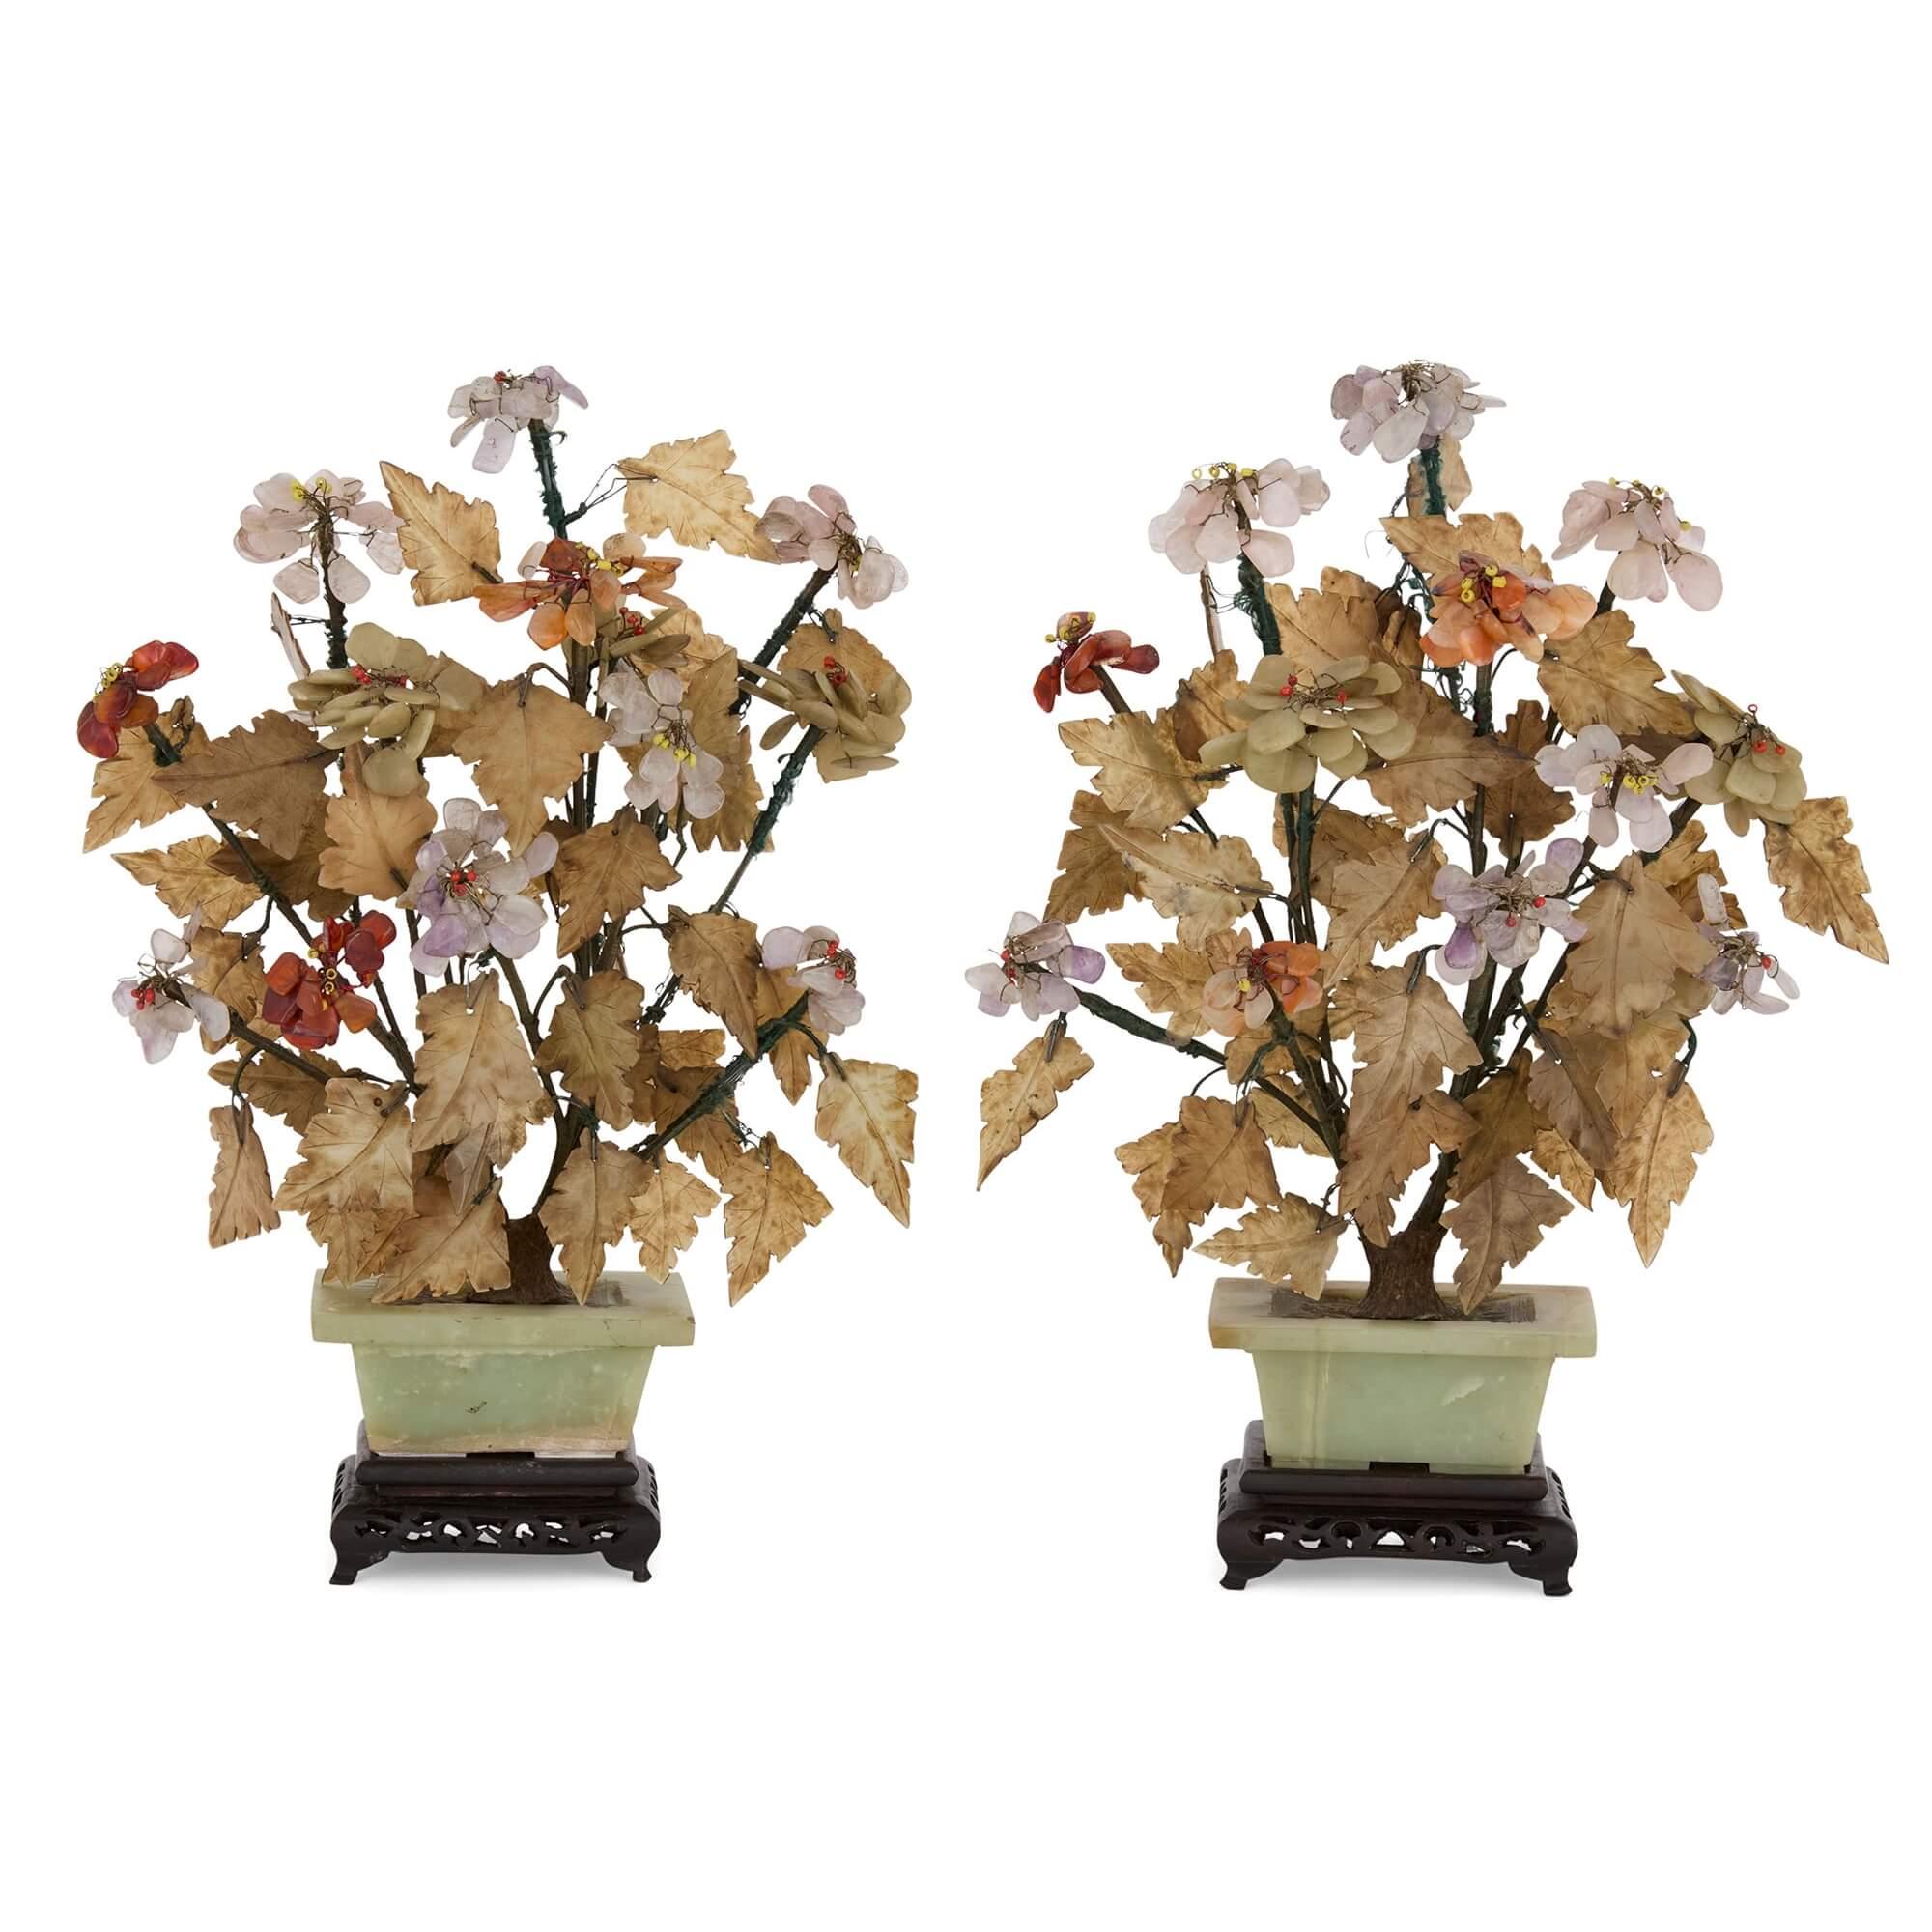 Pair of Chinese hardstone and jade flower models
Chinese, 20th Century 
Height 33cm, width 25cm, depth 17cm 

This superb pair of hardstone flower models are almost identical in design, comprising hardstone trees set within rectangular jade